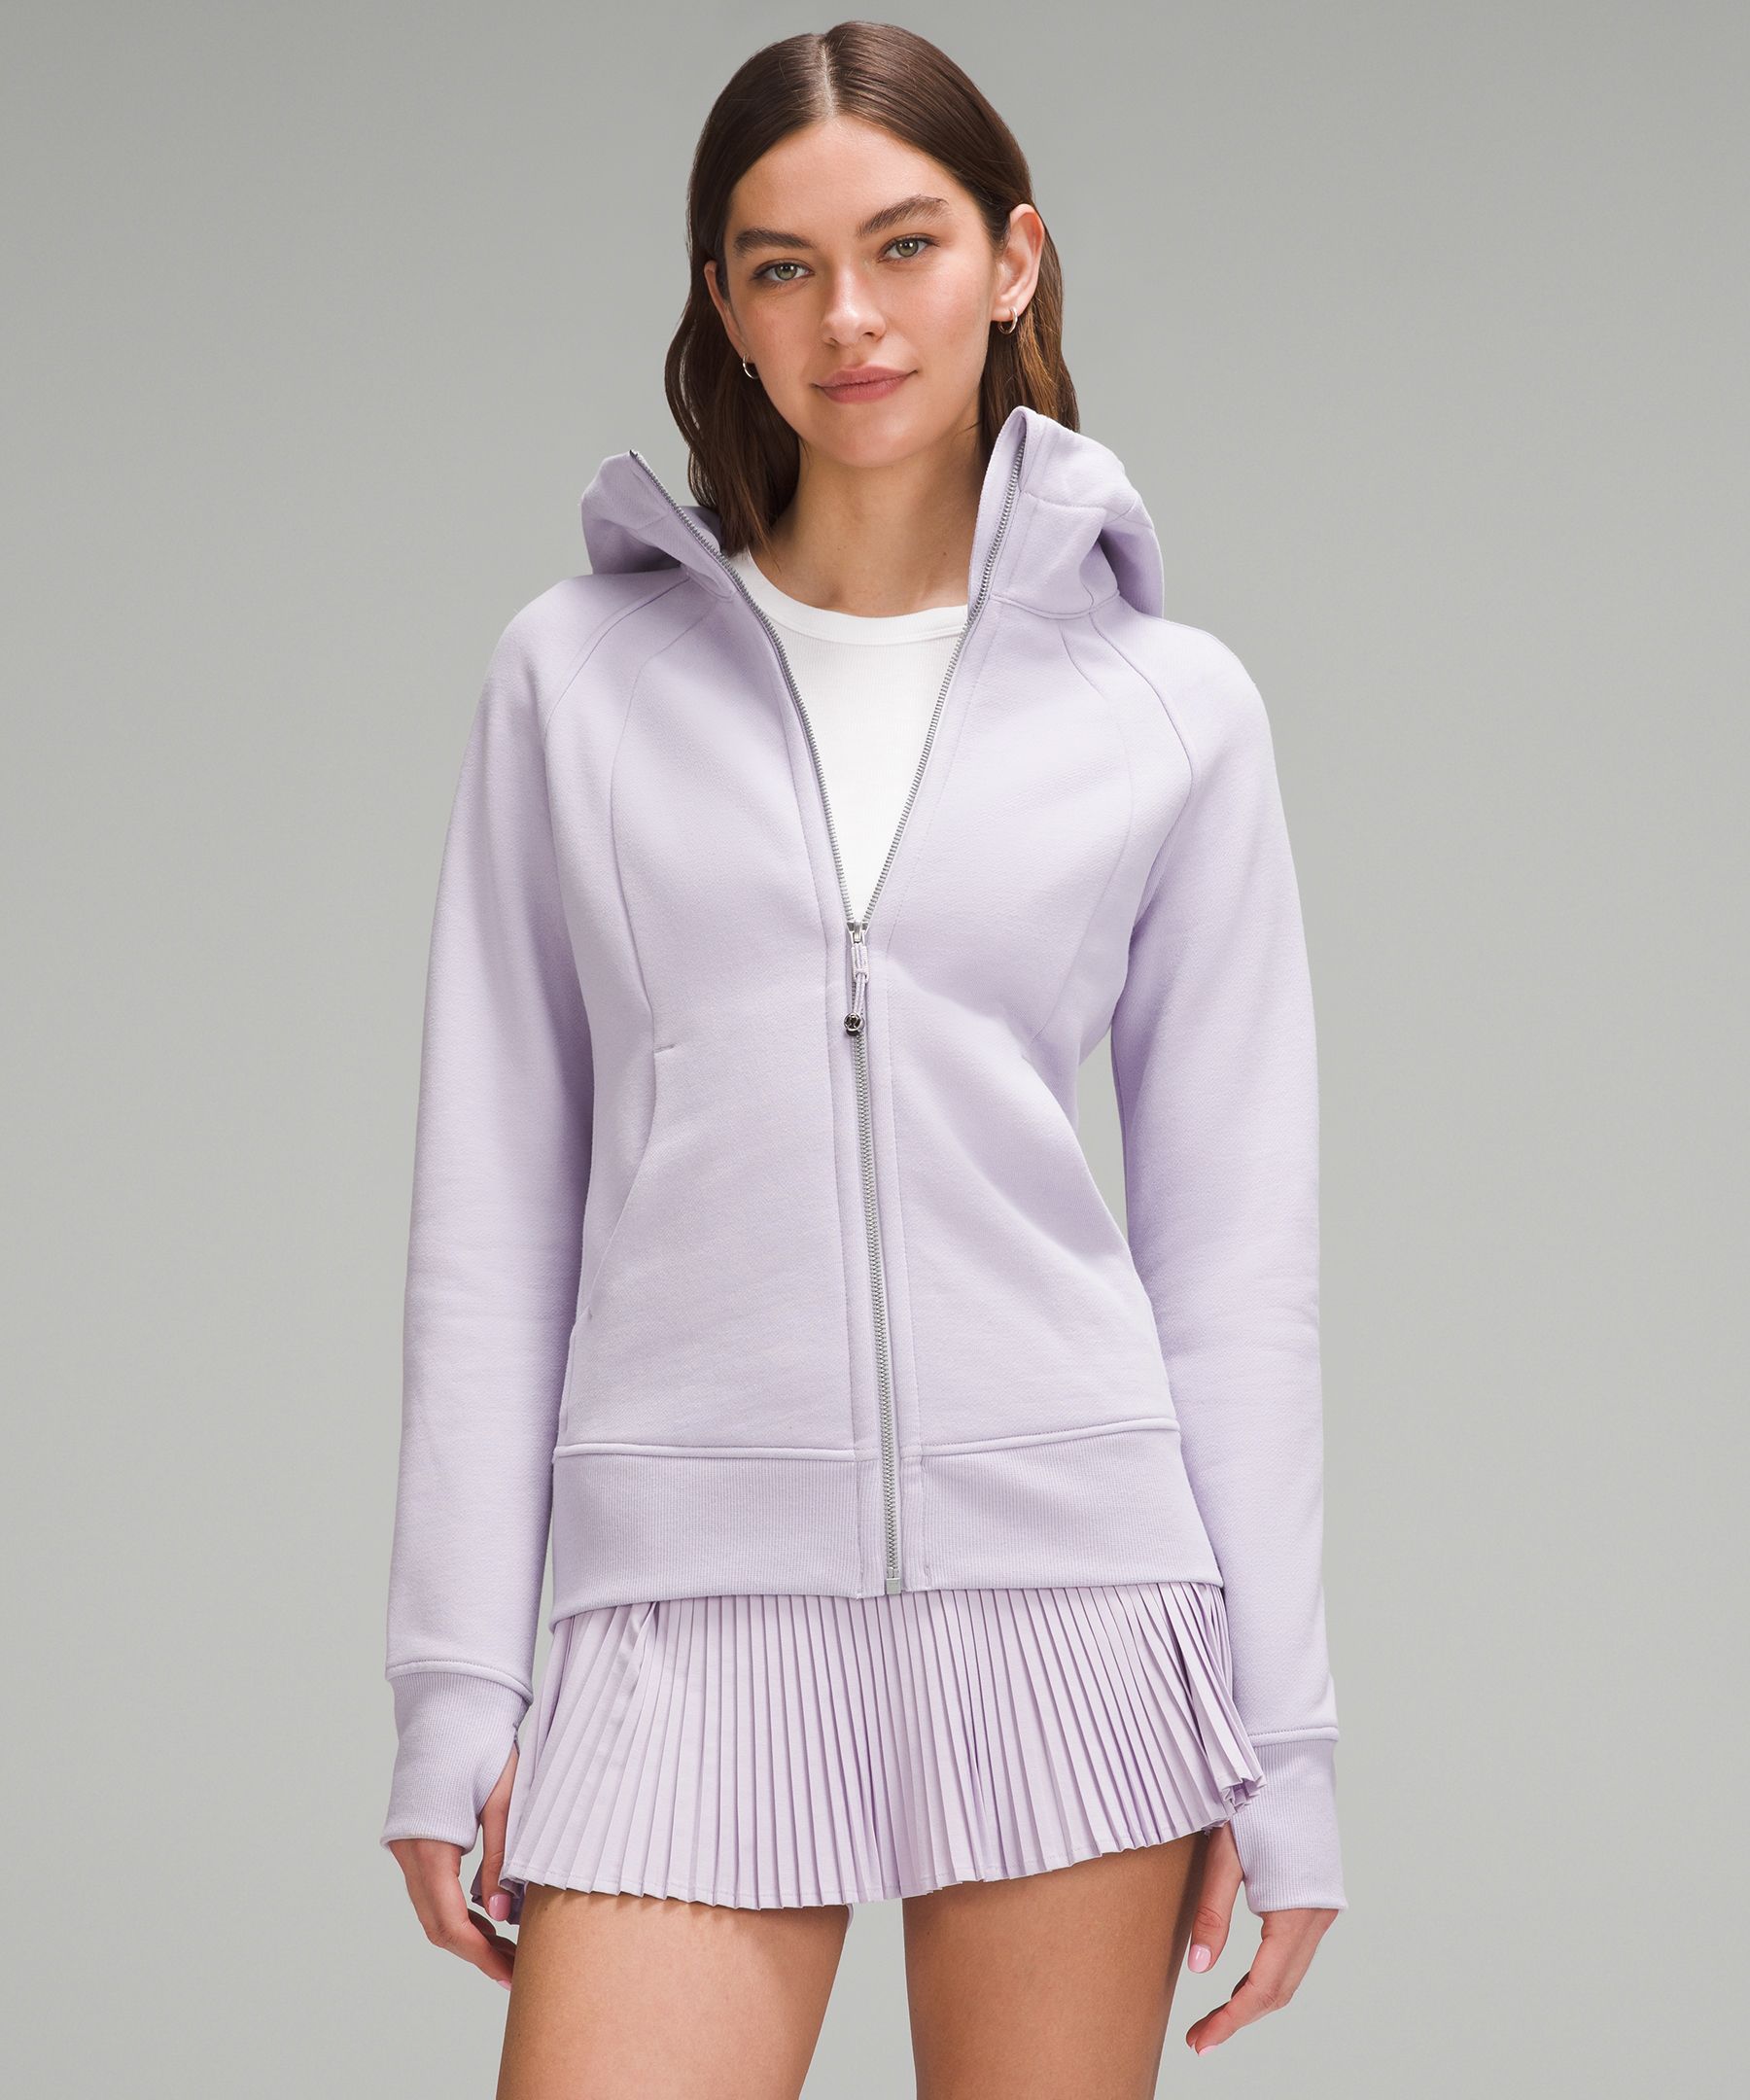 Lululemon RARE NWT Large Aloha Scuba Hoodie Size 10 Gray - $230 (34% Off  Retail) New With Tags - From Melissa